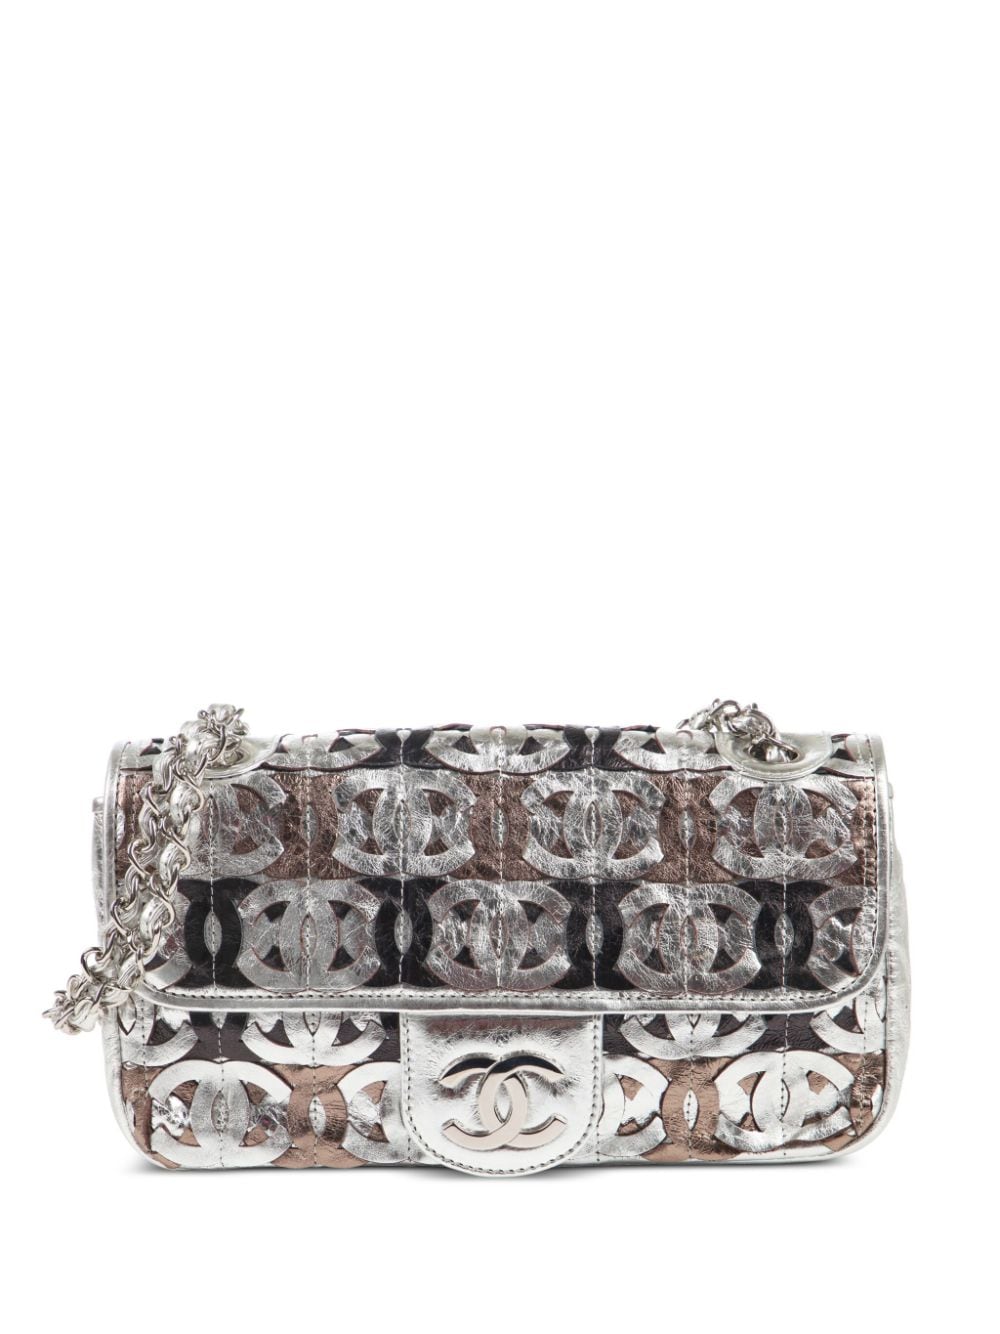 Pre-owned Chanel Classic Flap Metallic Shoulder Bag In Silver